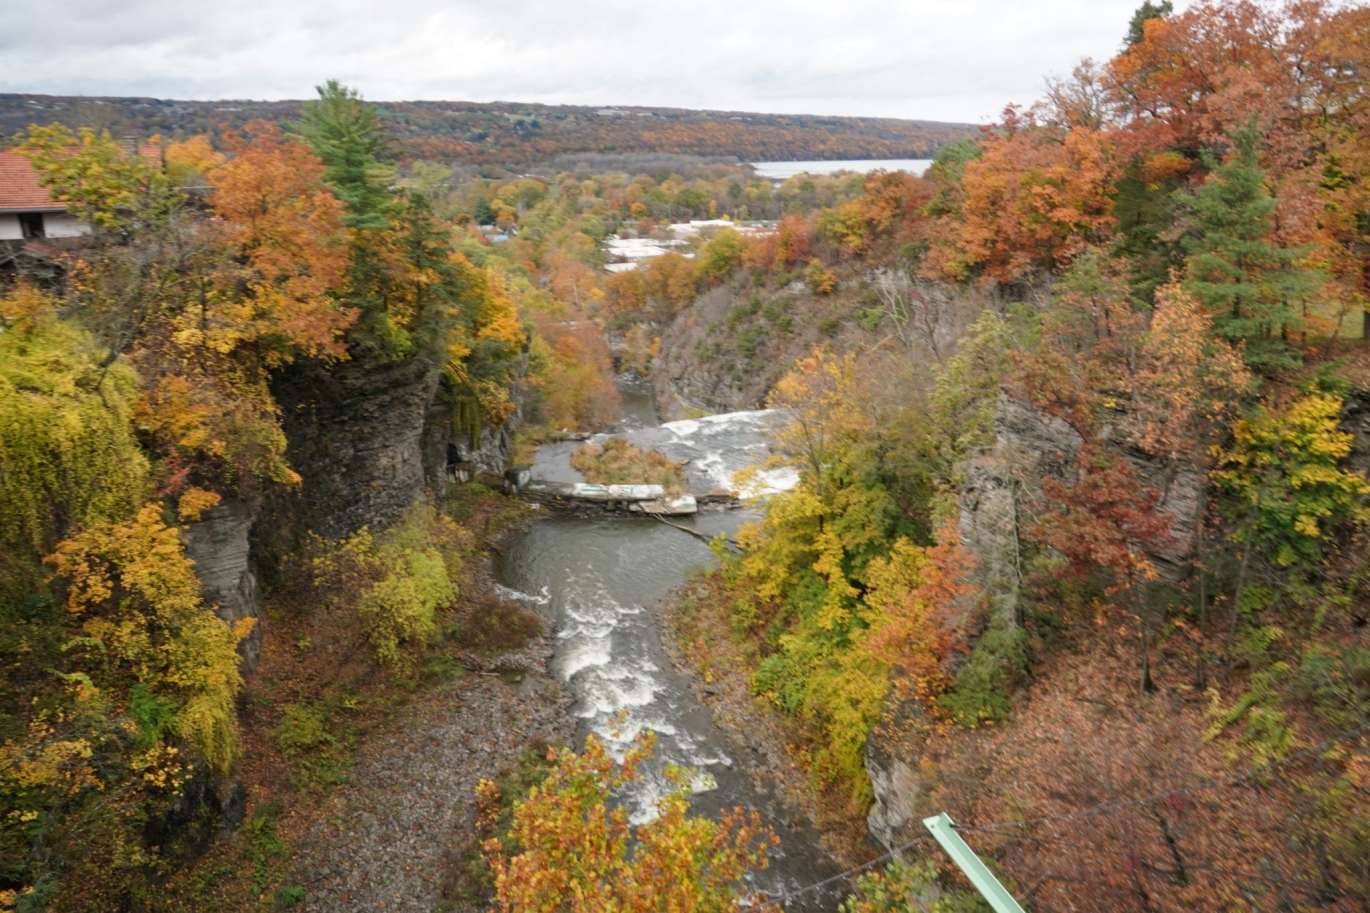 Cornell’s effort to power its campus utilizing only renewable energy sources is aided by its hydroelectric dam, located in Fall Creek. (Ben Parker / Sun Assistant Photography Editor)